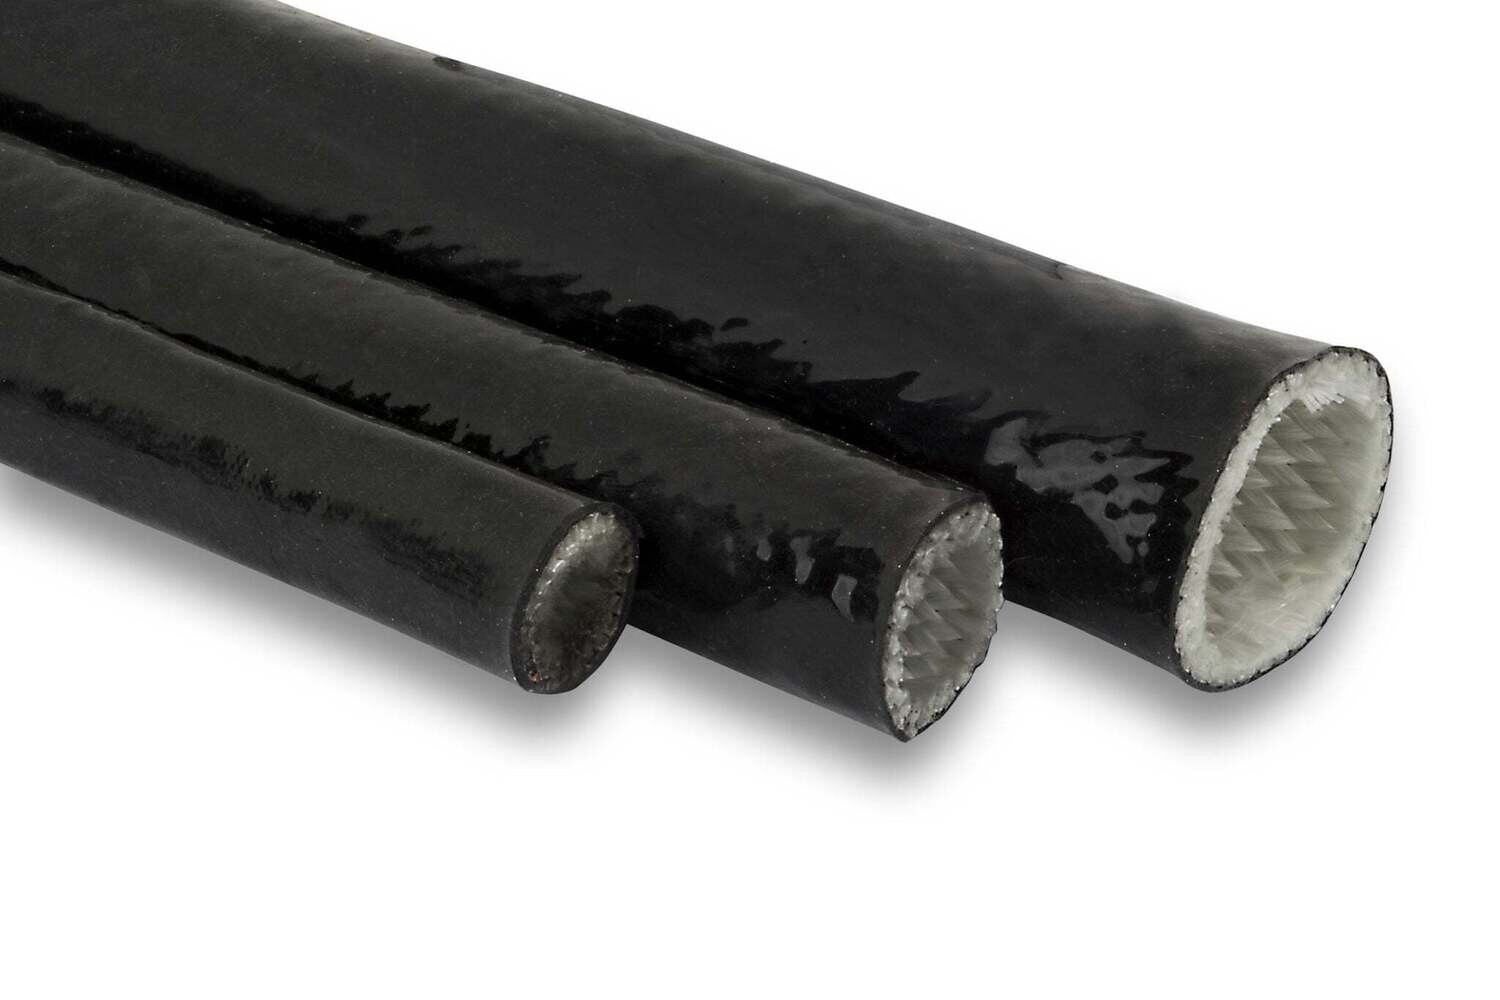 Black Silicon High Heat Sleeve - 20mm, 2.0m Multiple Qty will come on a continuous Roll